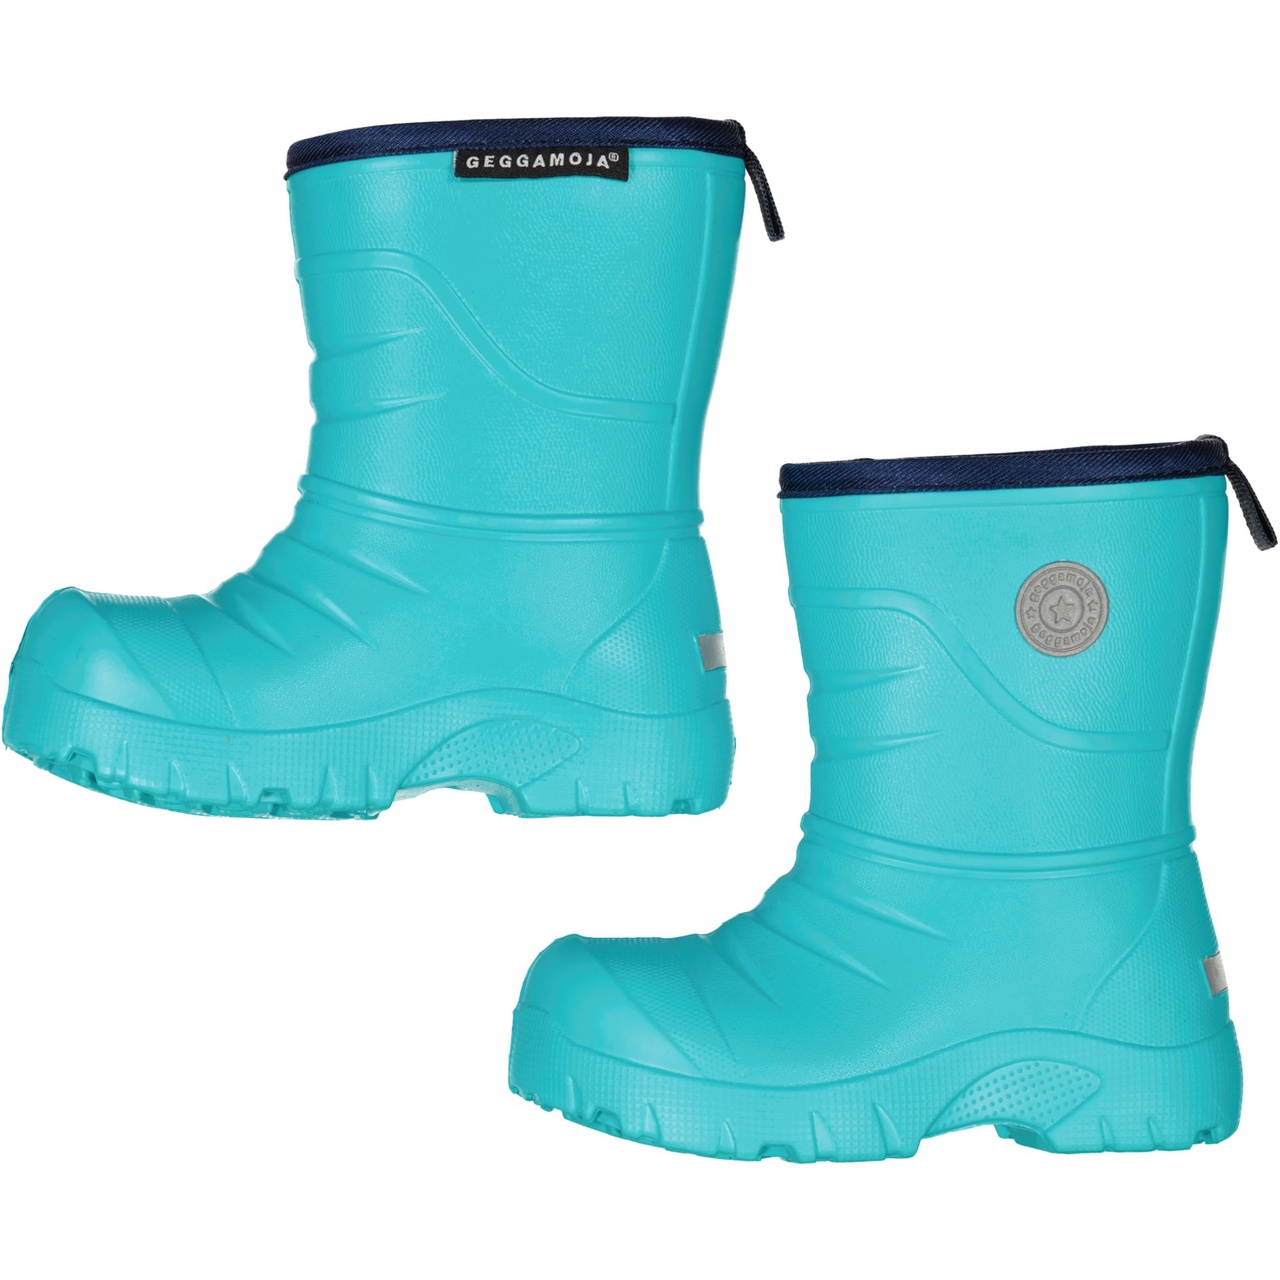 All-weather Boot Turquoise 28